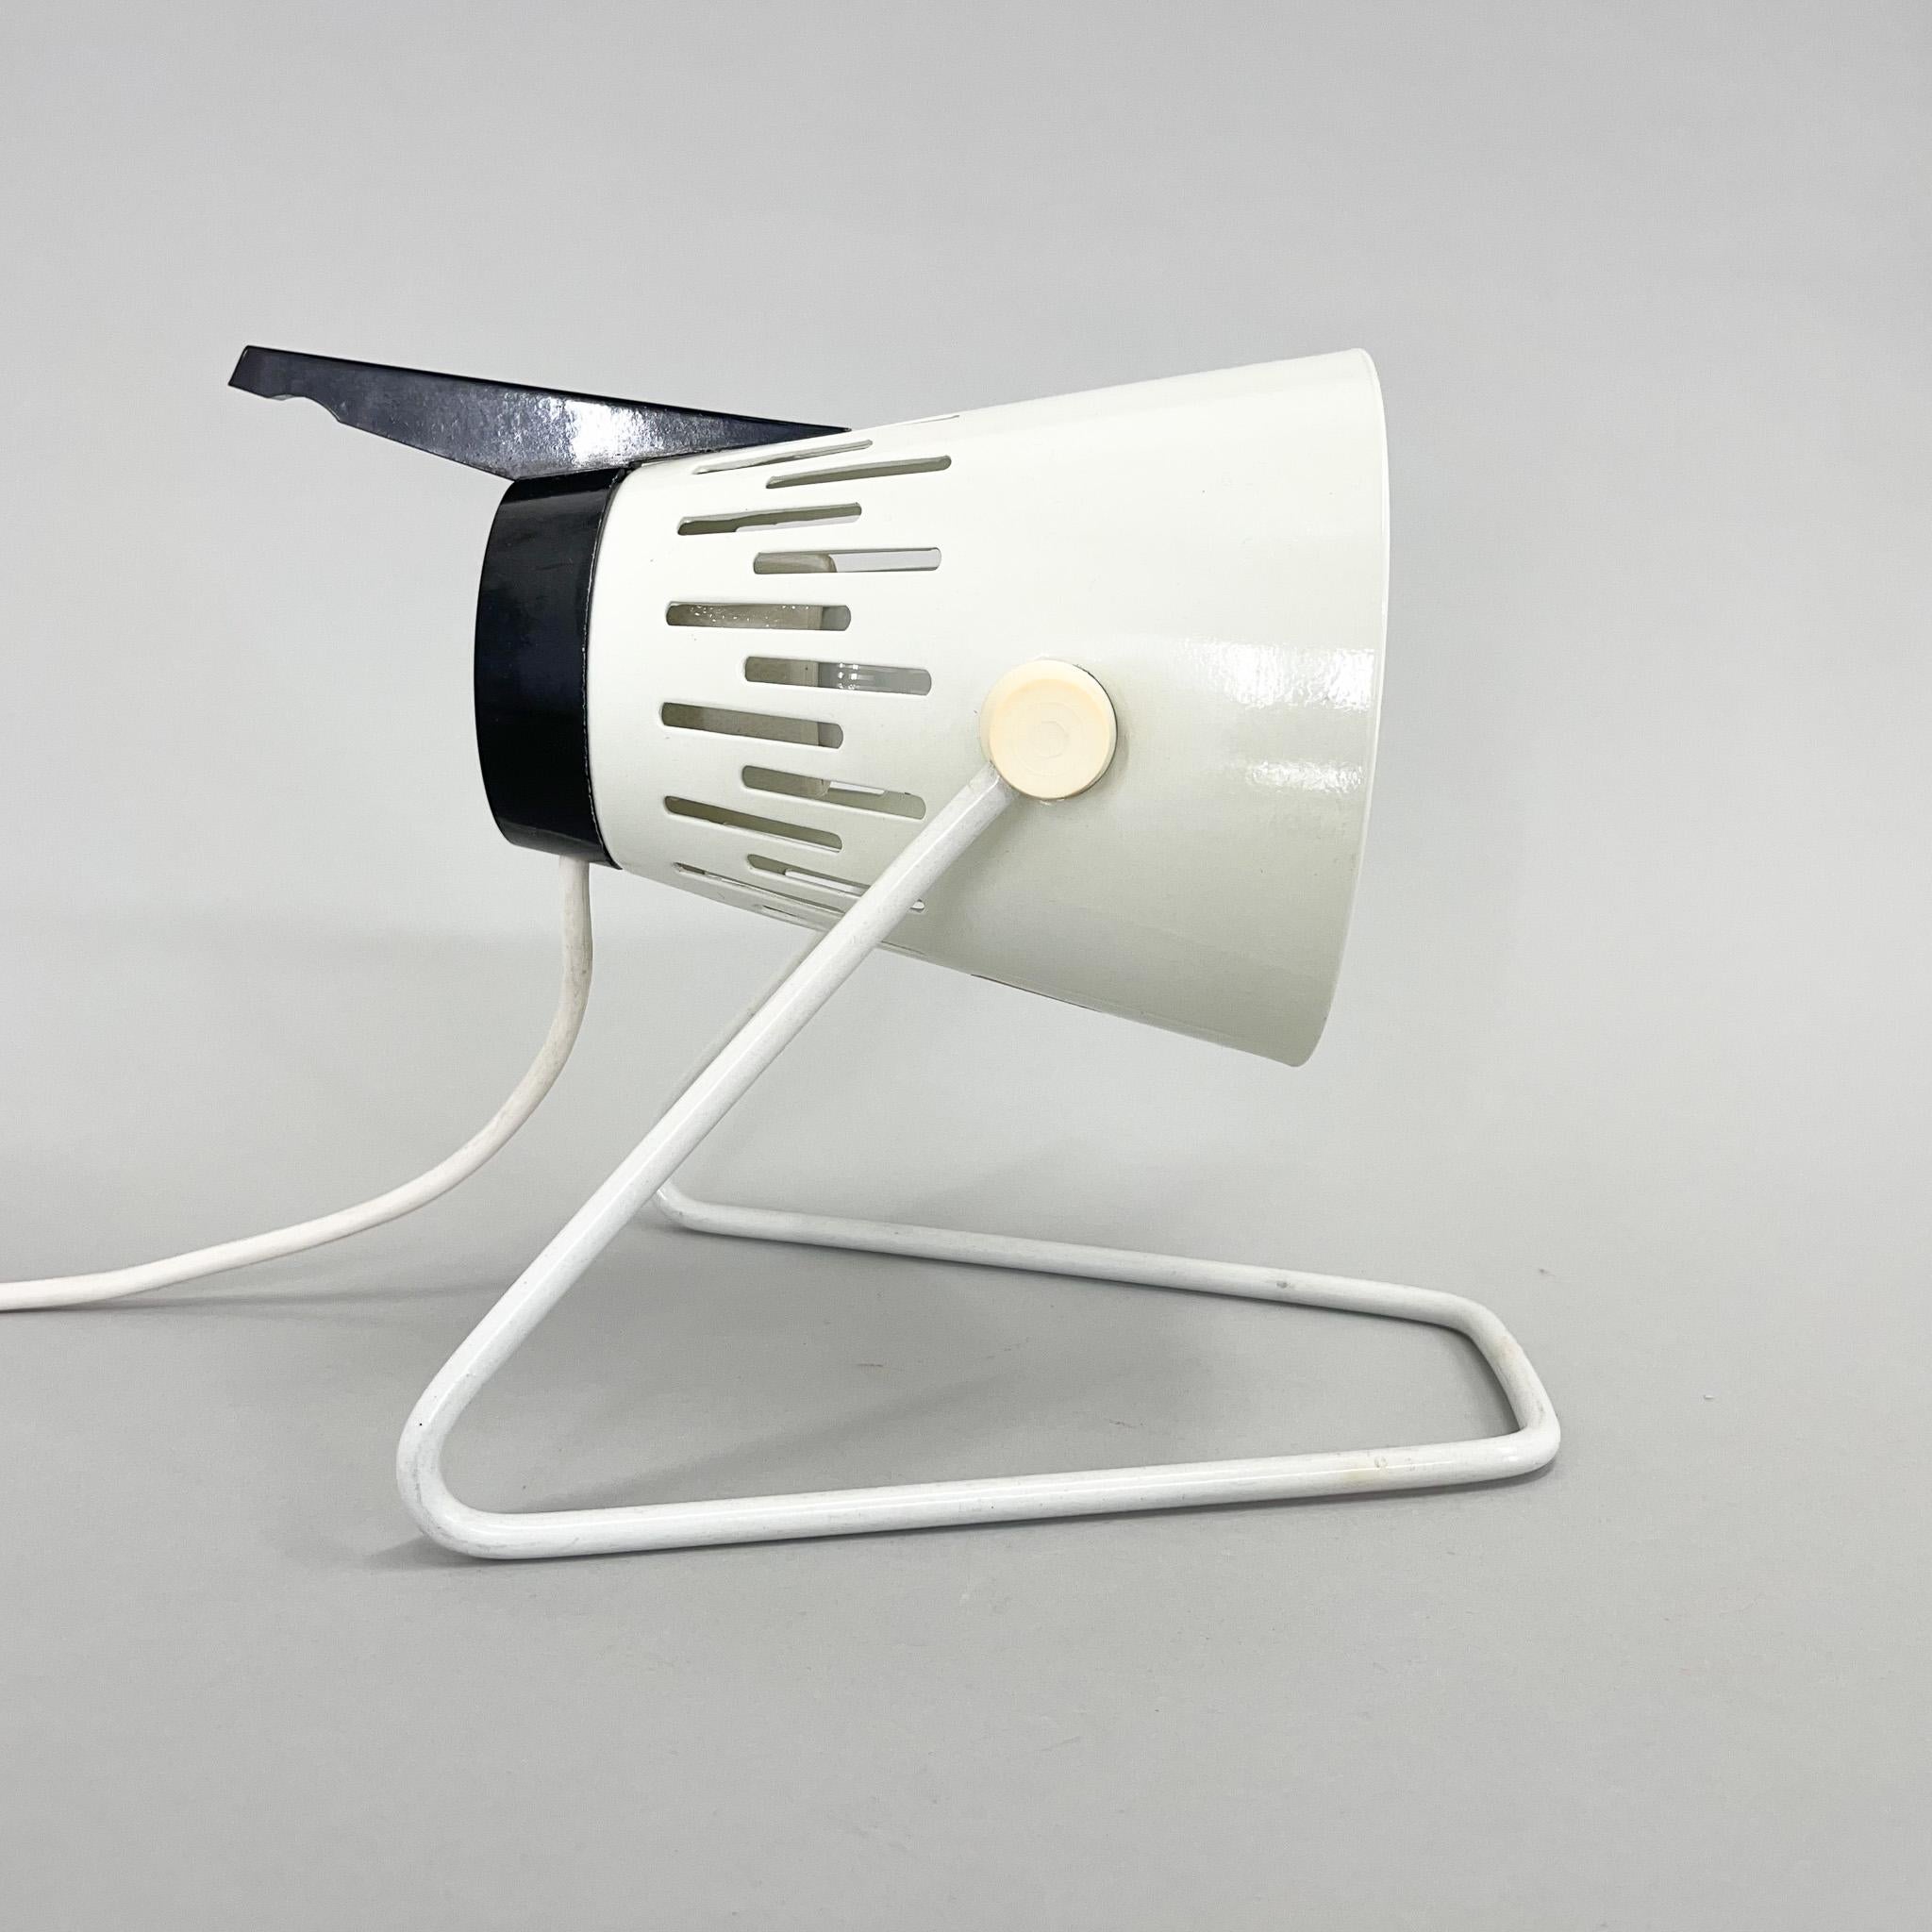 Vintage Space Age metal and plastic table lamp made in the 1970s in Leipzig (Germany).